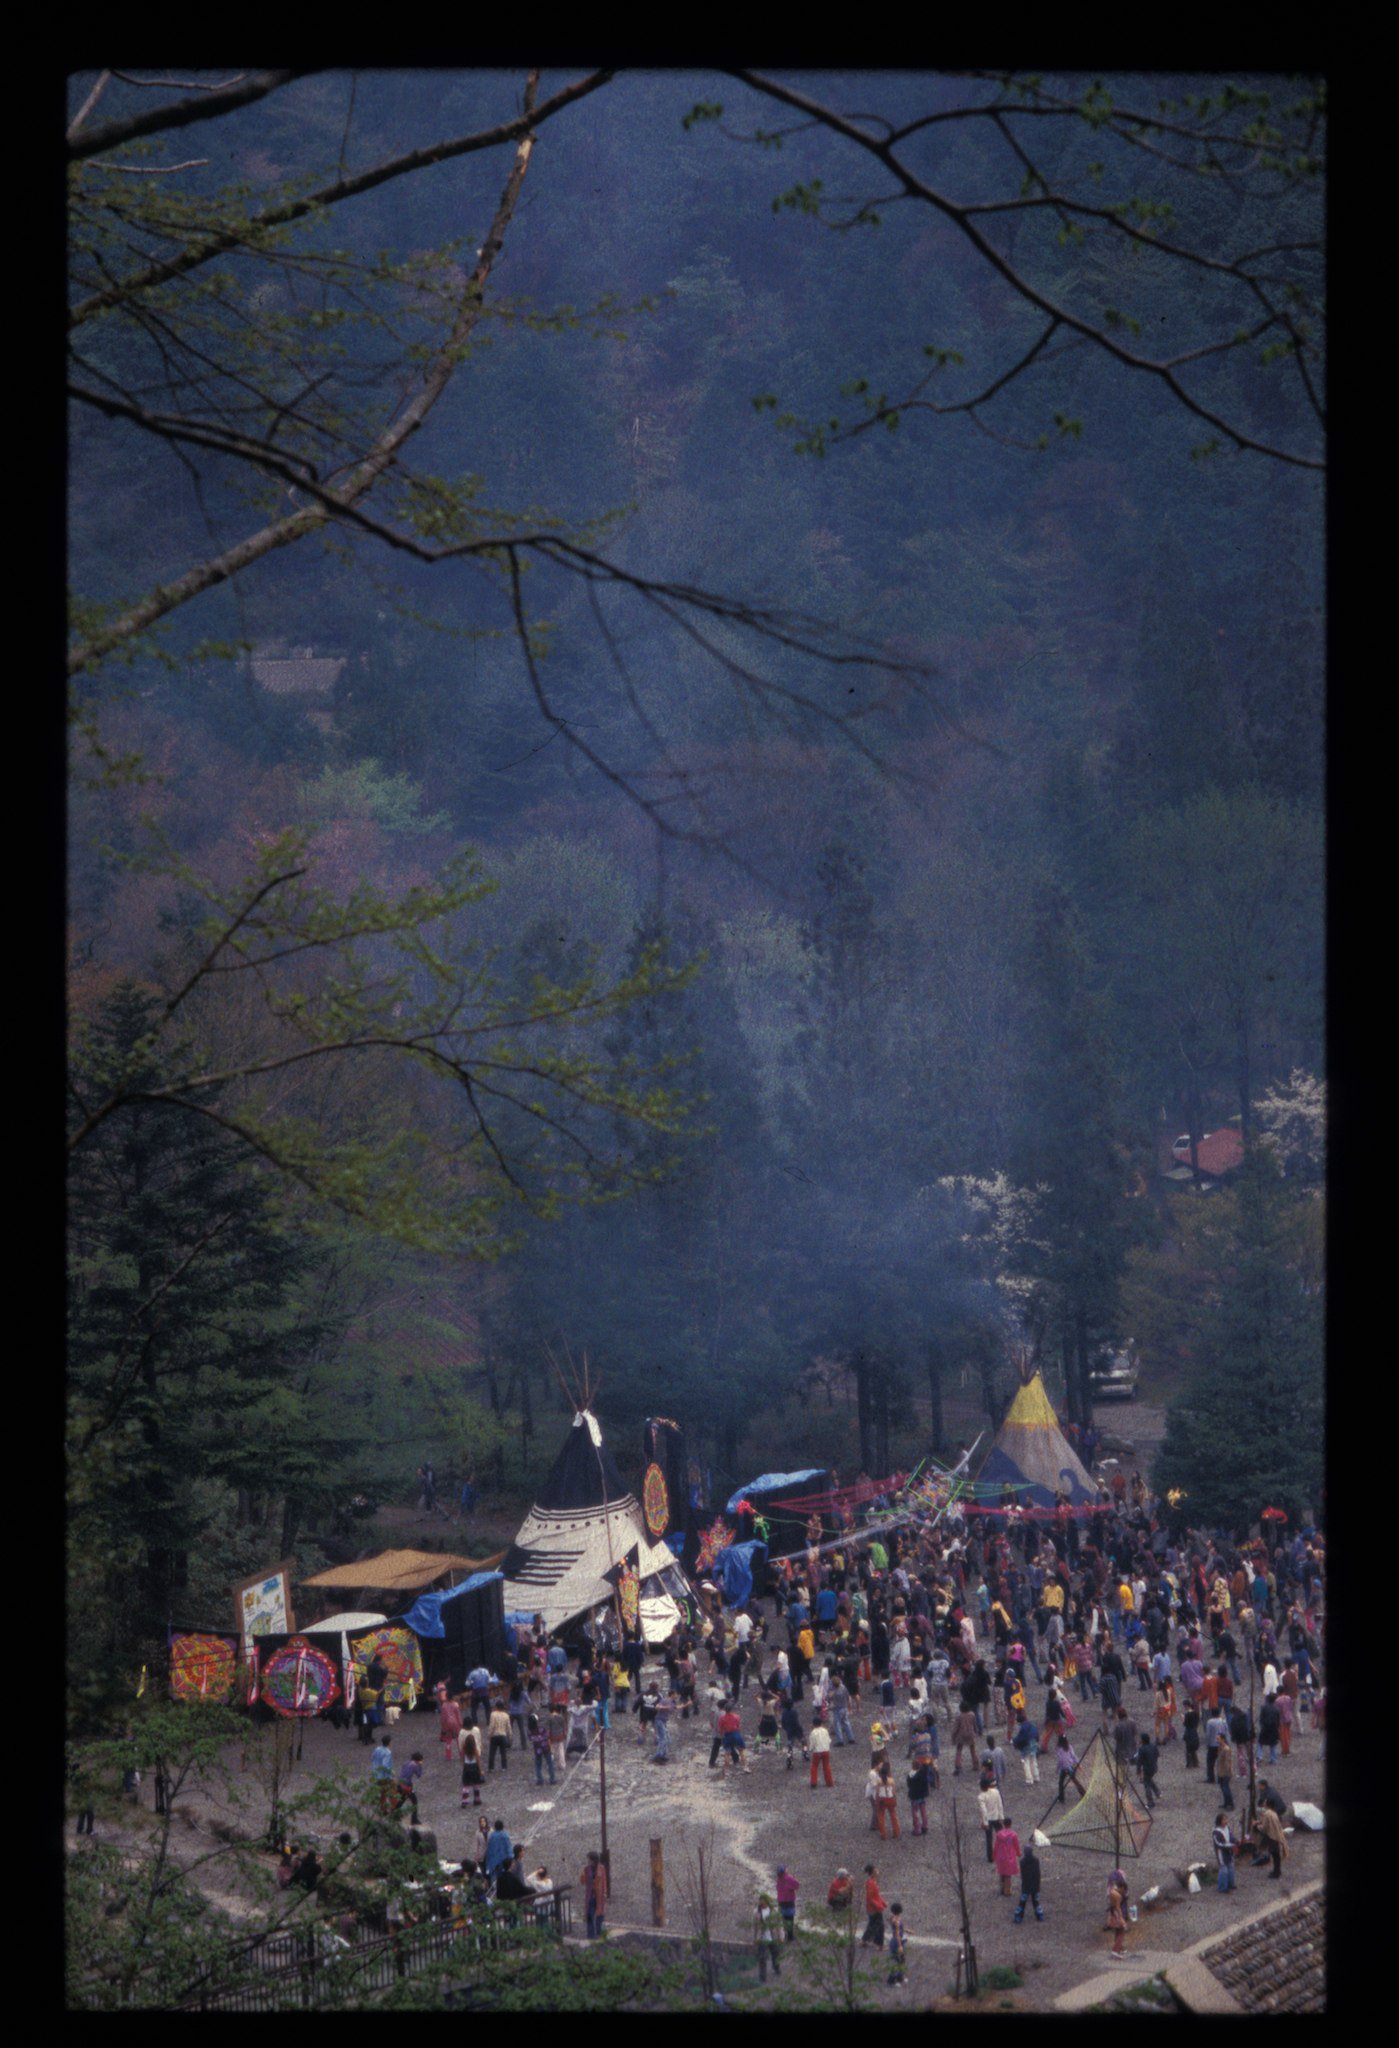 “EQUINOX”(1996) at Doai Campsite, Gifu Prefecture
The photos taken by Kotaro in “EQUINOX” at Doai Campsite were used for the first time on the cover of a publication, the free newspaper BALANCE. Published from 1999 to 2001, the magazine focused on outdoor party culture. It was edited by Takashi Kikuchi, a freelance writer who was also at the center of the scene at the time
Photography Kotaro Manabe